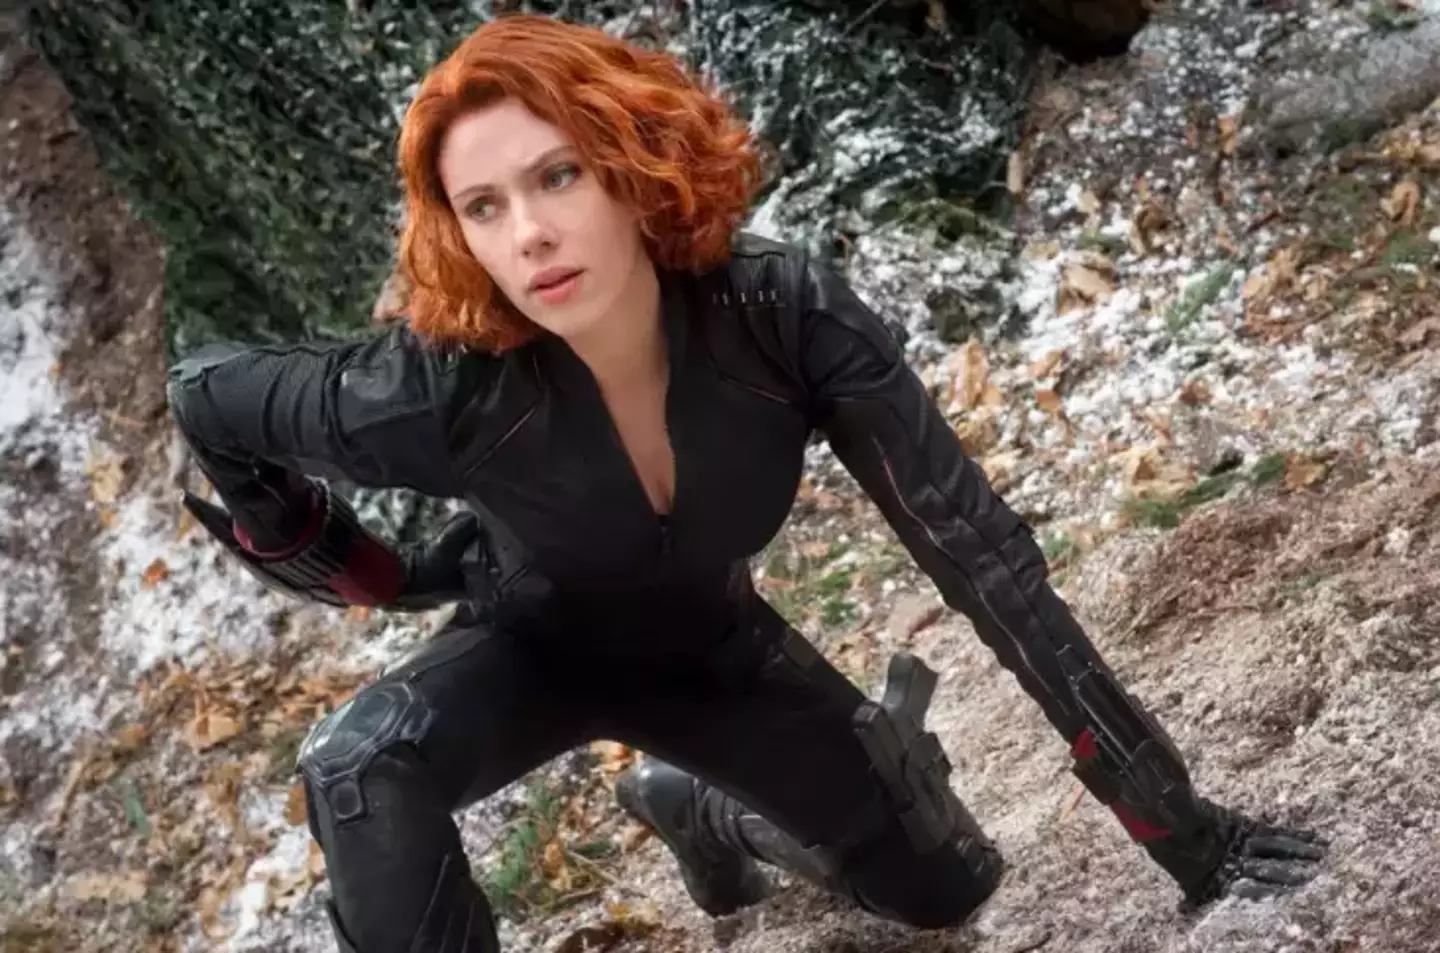 Johansson last featured in the MCU back in 2021.